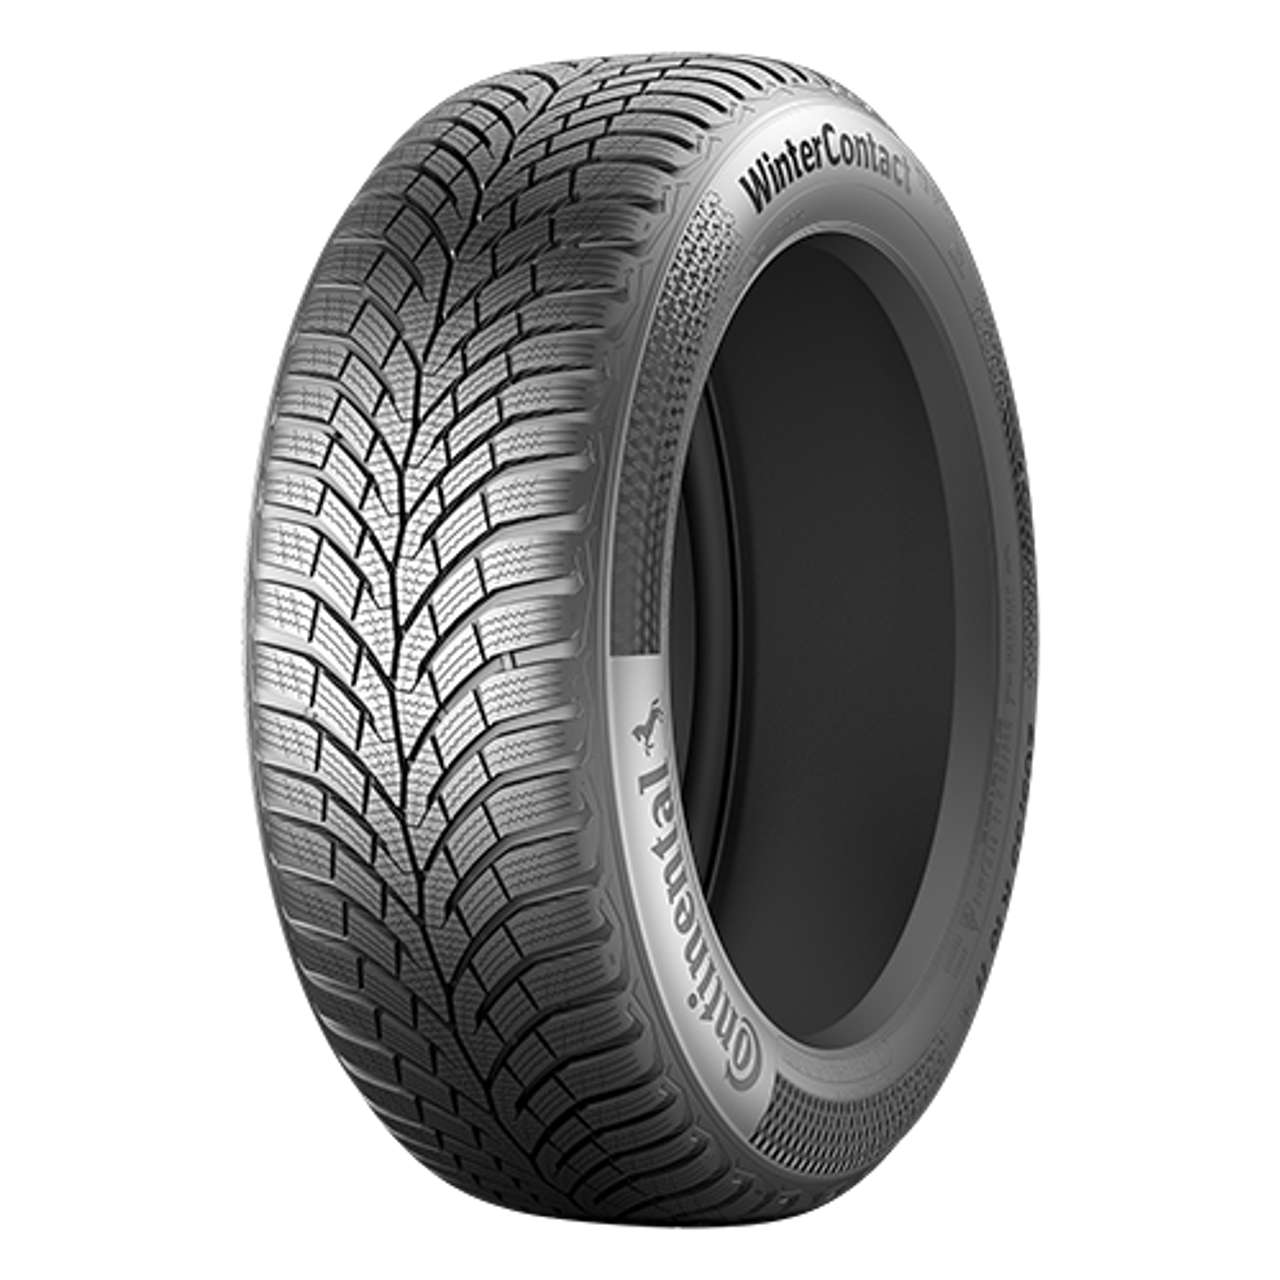 CONTINENTAL WINTERCONTACT TS 870 (EVc) 215/55R16 97V BSW von Continental